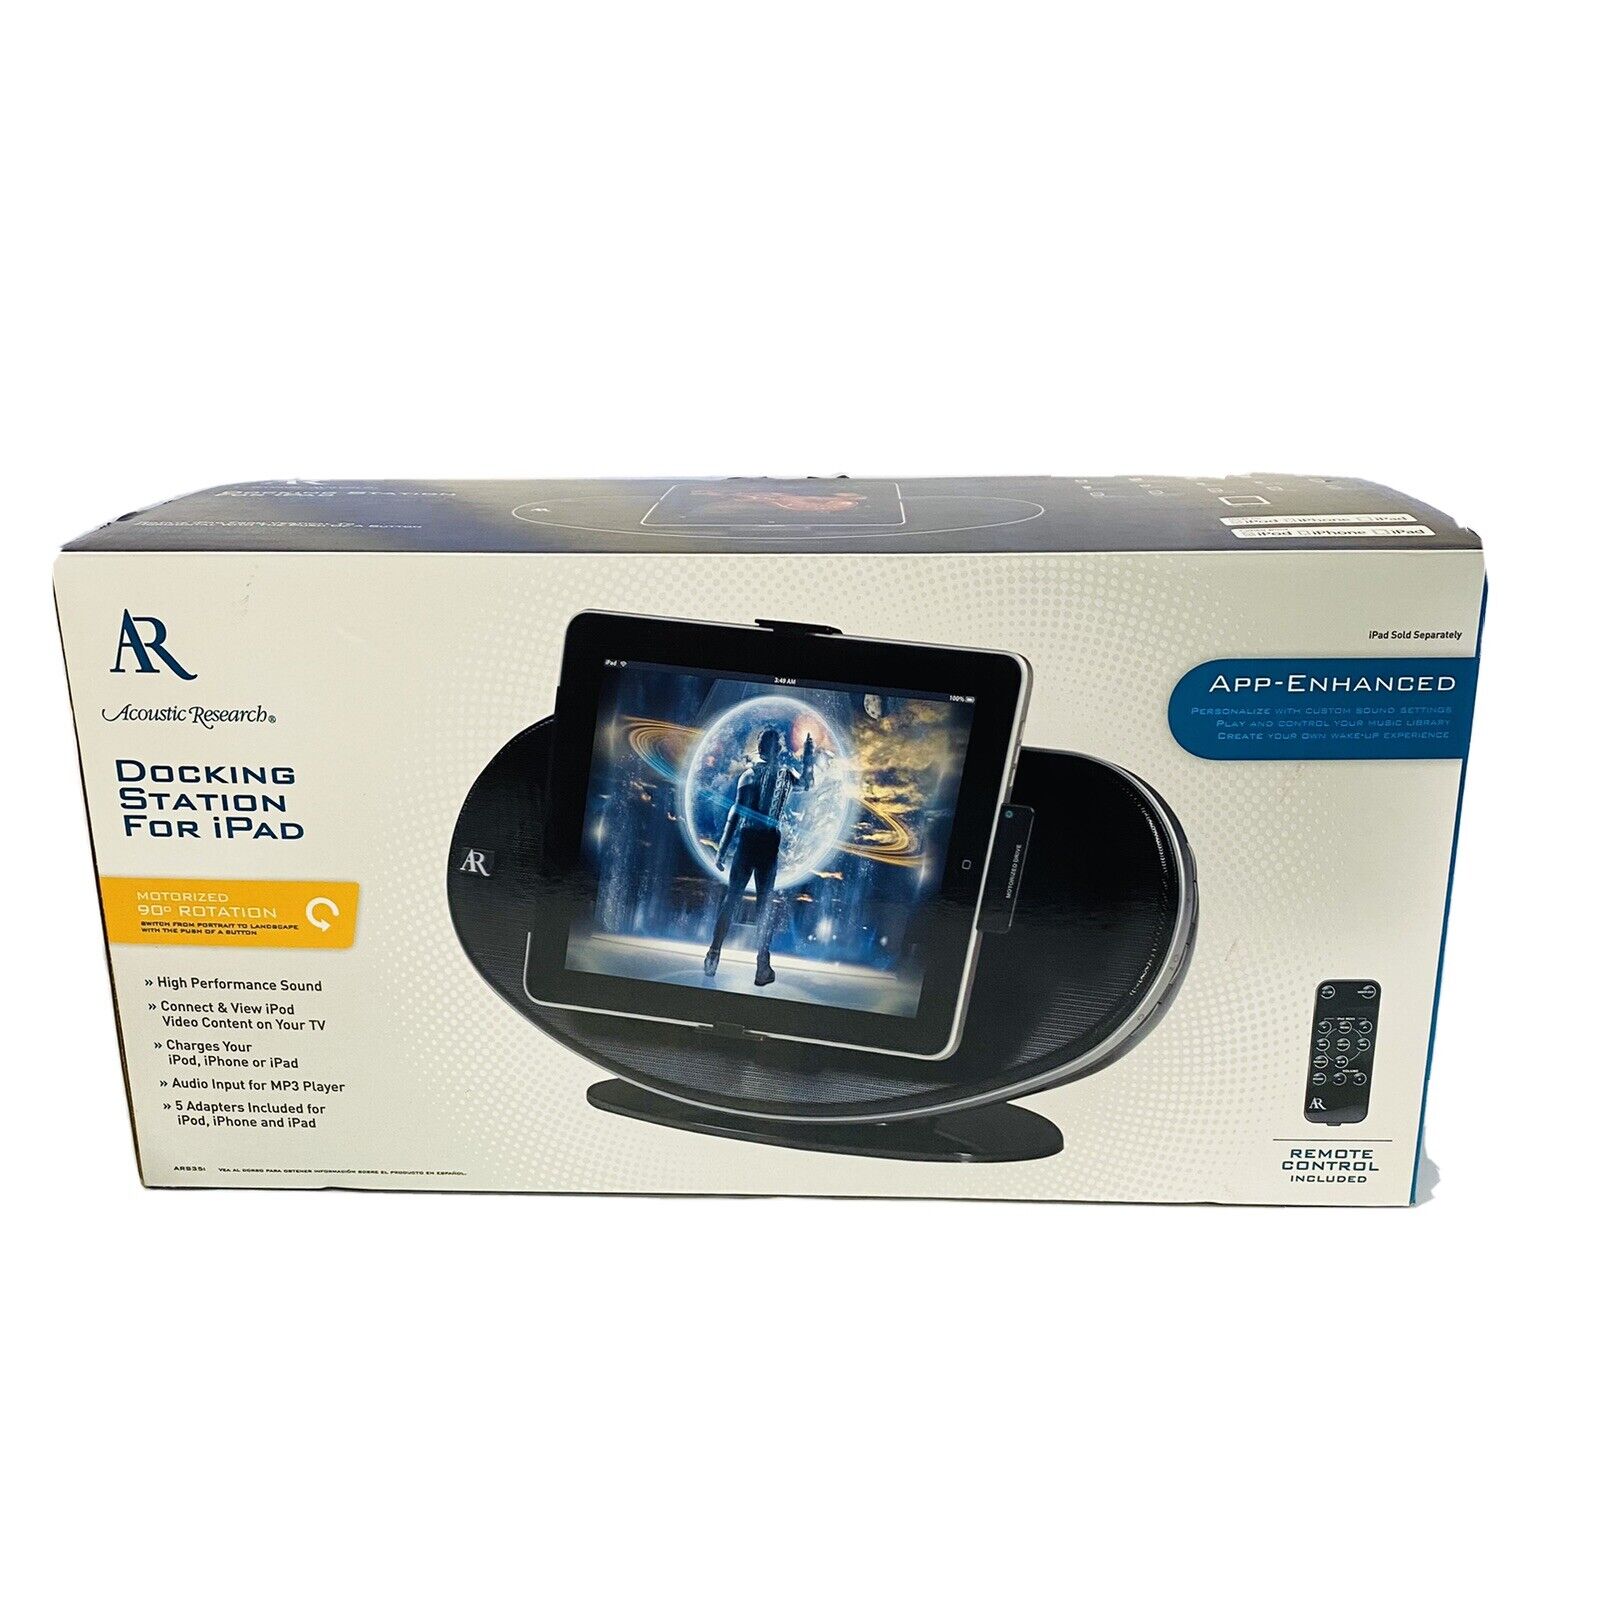 Acoustic Research ARS35i Docking Station for iPad, iPhone and iPod